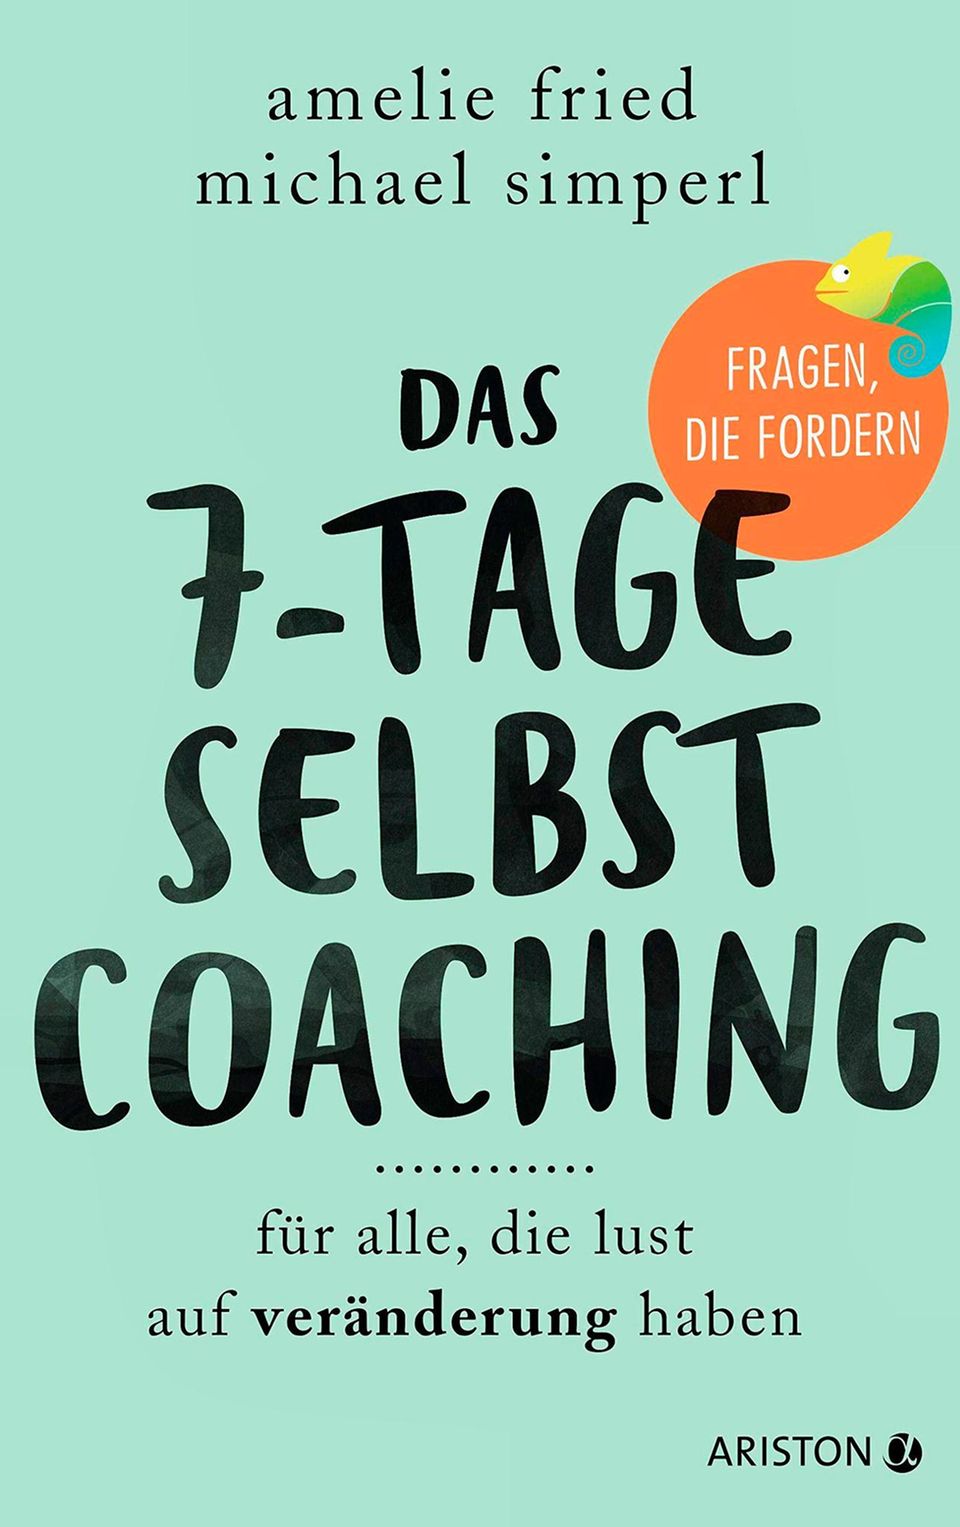 Book tip: Amelie Fried and Michael Simperl: "The 7-day self-coaching.  For everyone who wants to change”, 208 pages, 18 euros, Ariston